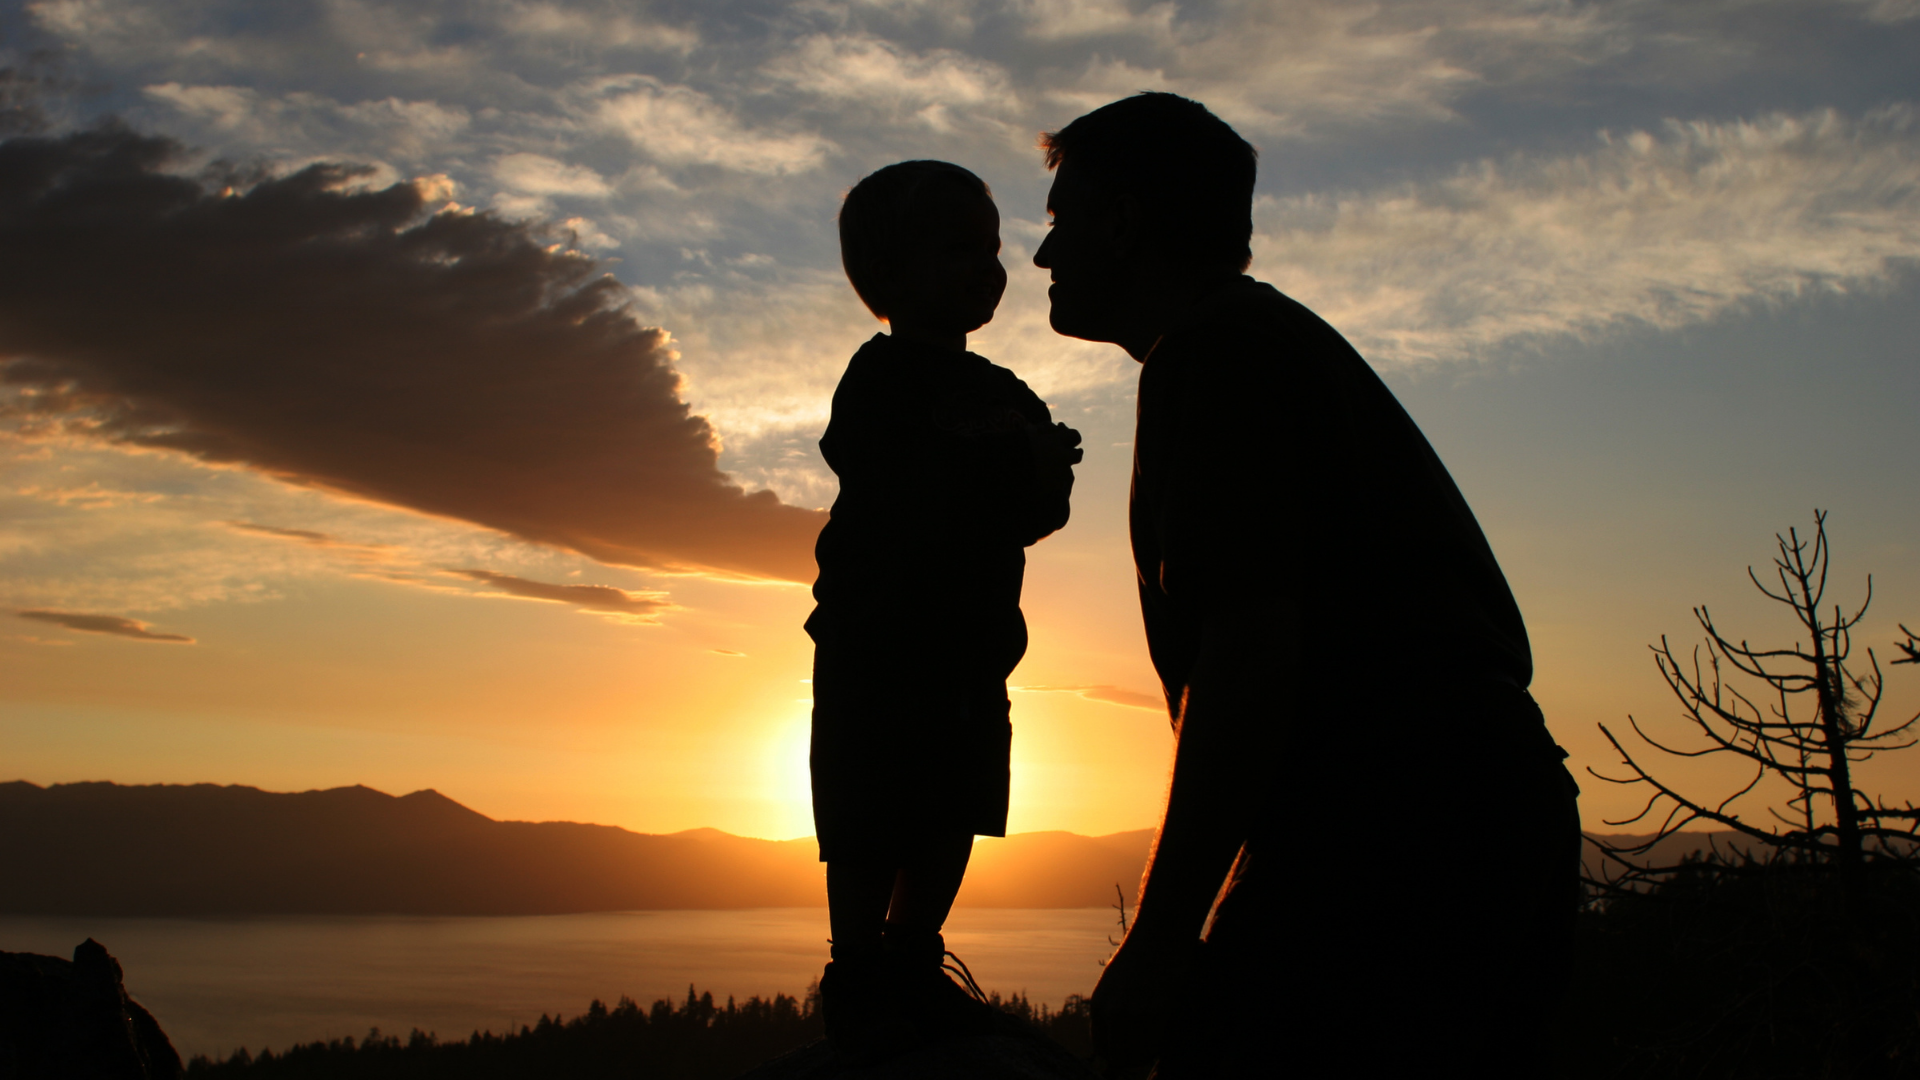 THE BLESSEDNESS OF FATHERHOOD